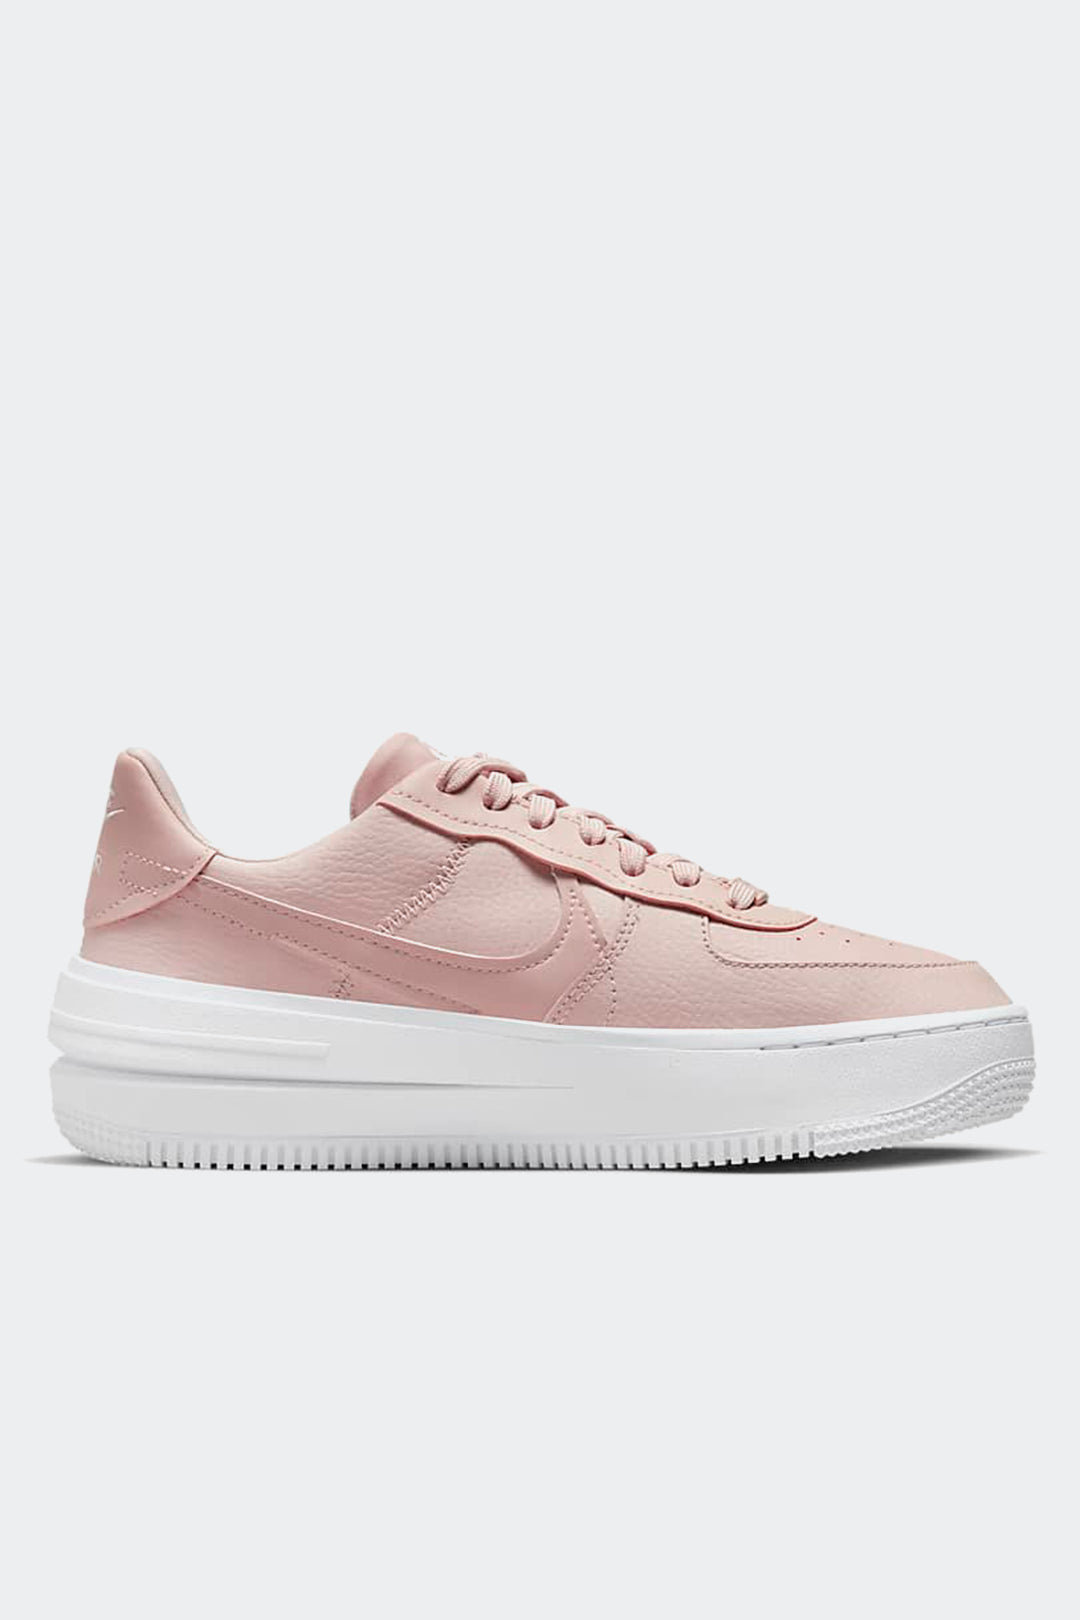 NIKE AIR FORCE 1 PLT.AF.ORM - MUJER - HYPE